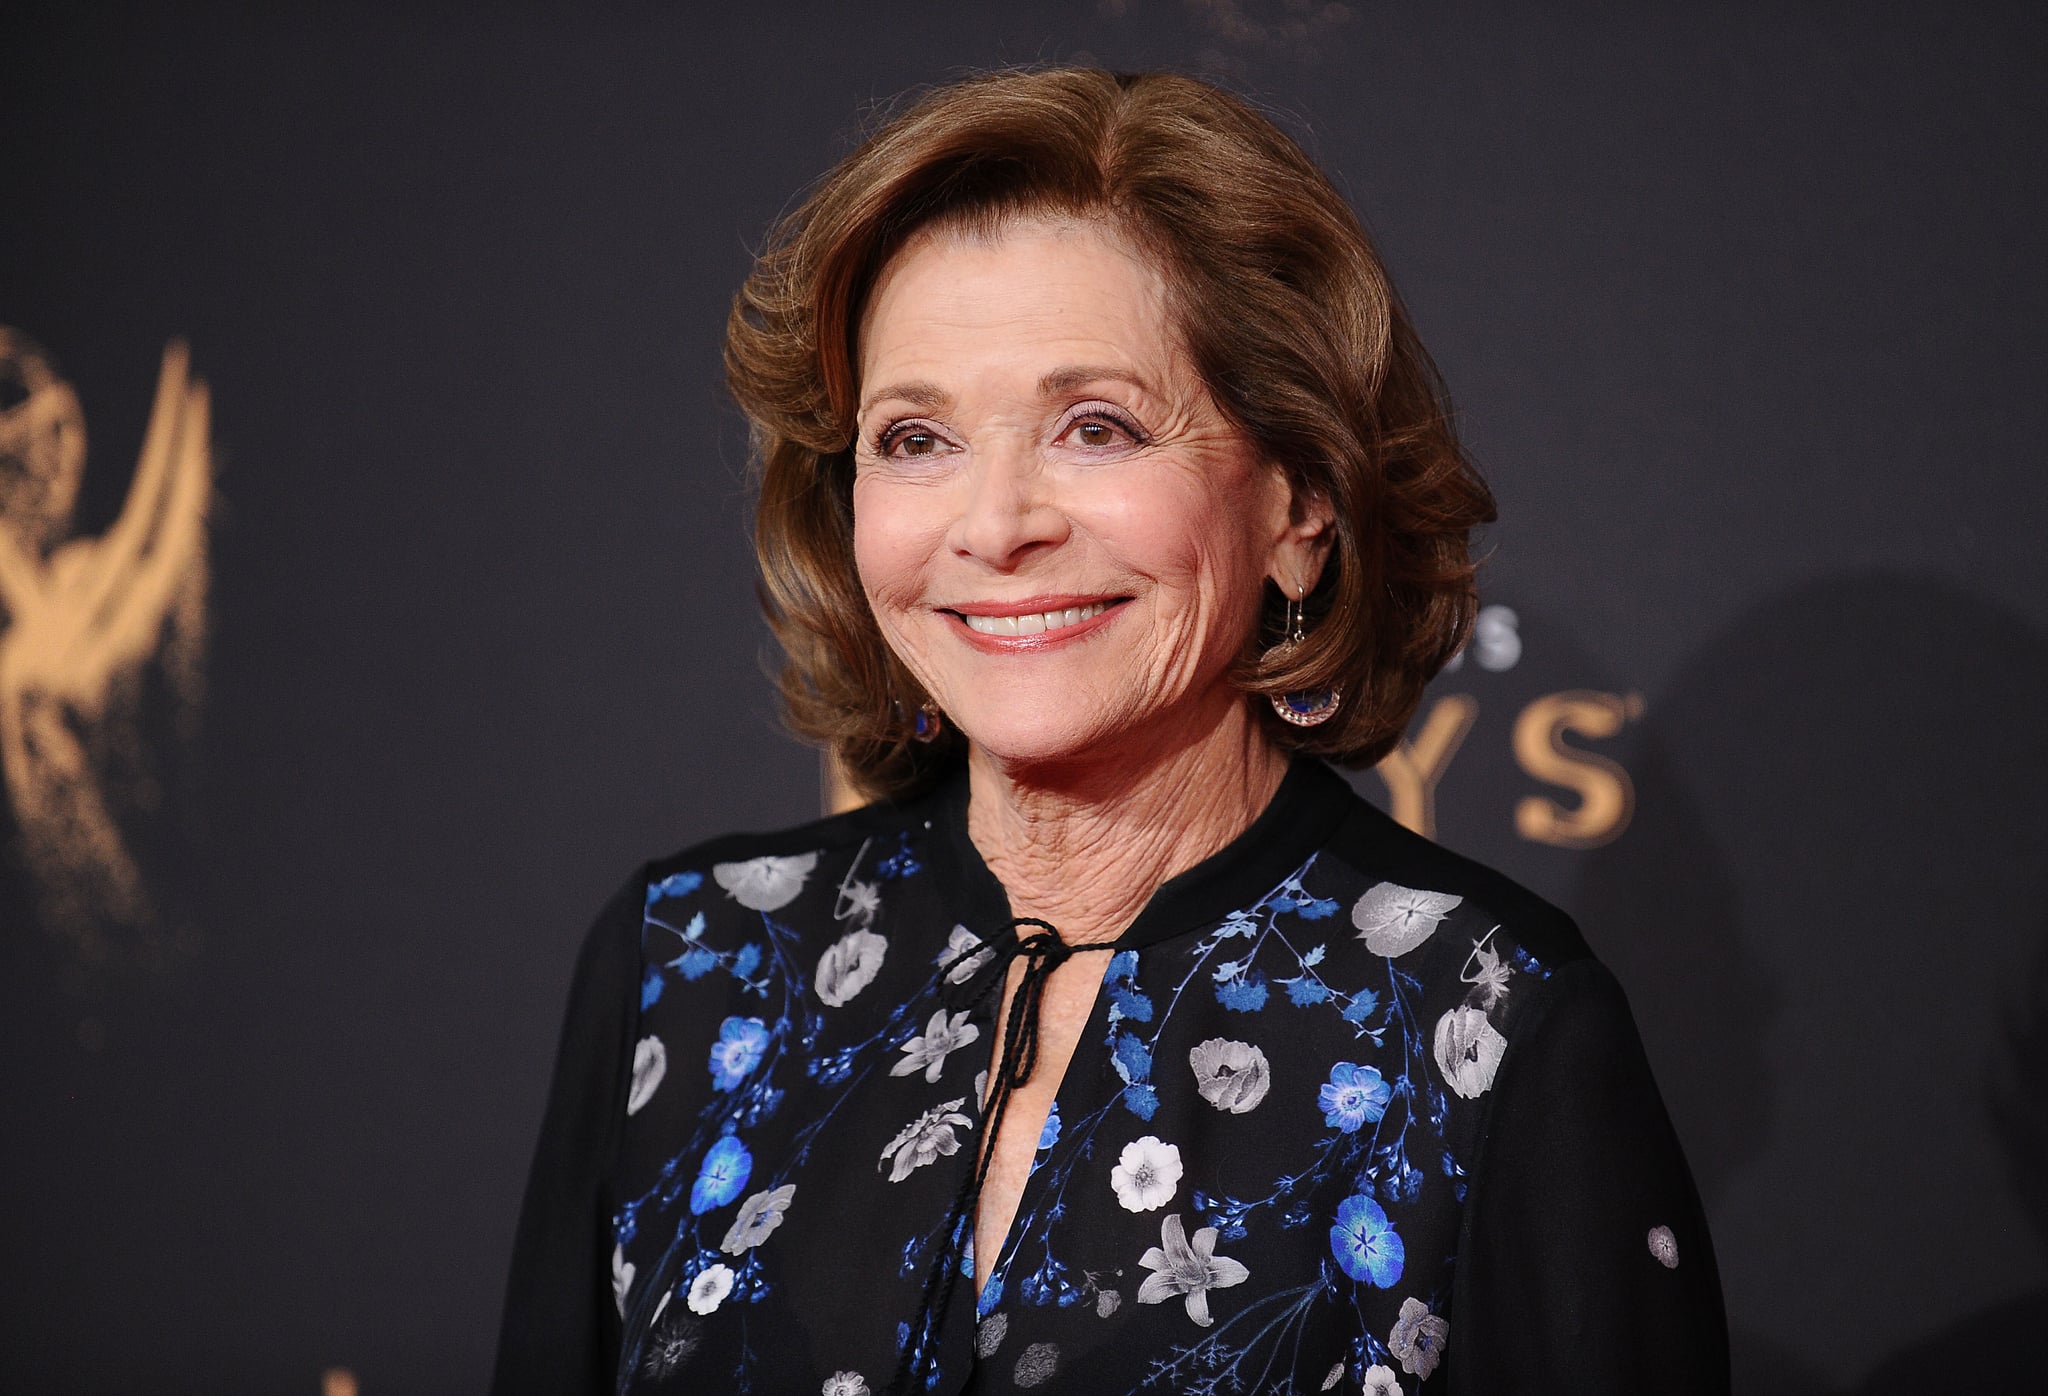 LOS ANGELES, CA - SEPTEMBER 09: Actress Jessica Walter attends the 2017 Creative Arts Emmy Awards at Microsoft Theatre on September 9, 2017 in Los Angeles, California.  (Photo by Jason LaVeris/FilmMagic)